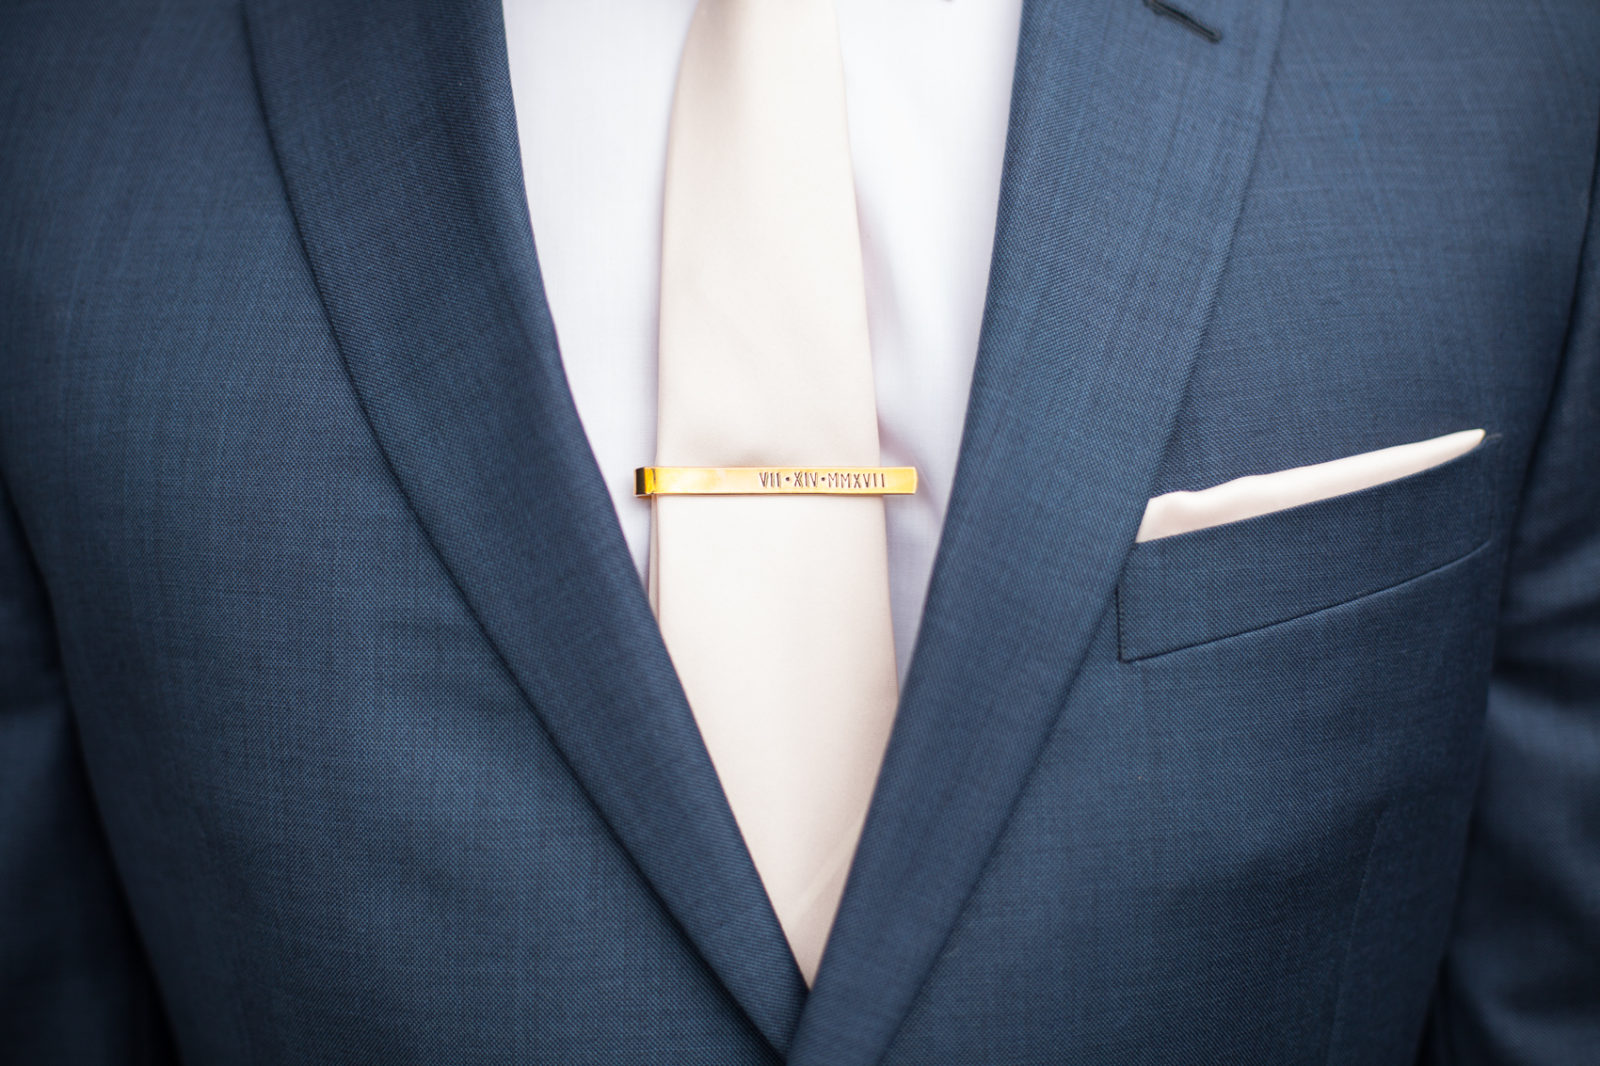 groom in navy blue suit with pink tie pocket square and personalized tie bar with wedding date engraved with roman numerals